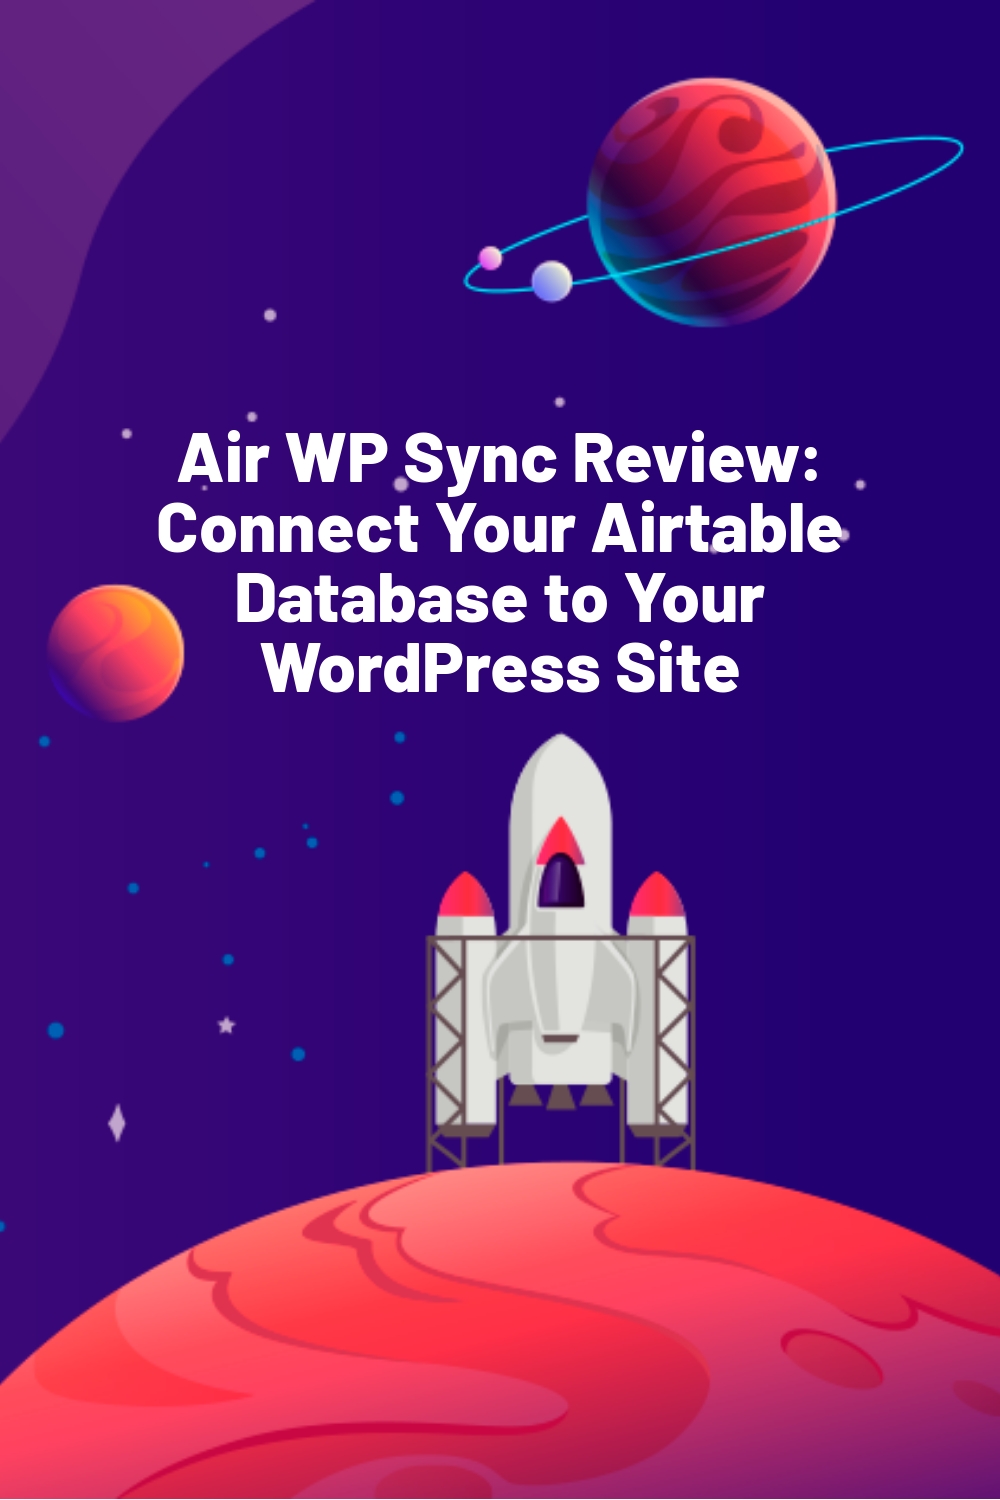 Air WP Sync Review: Connect Your Airtable Database to Your WordPress Site